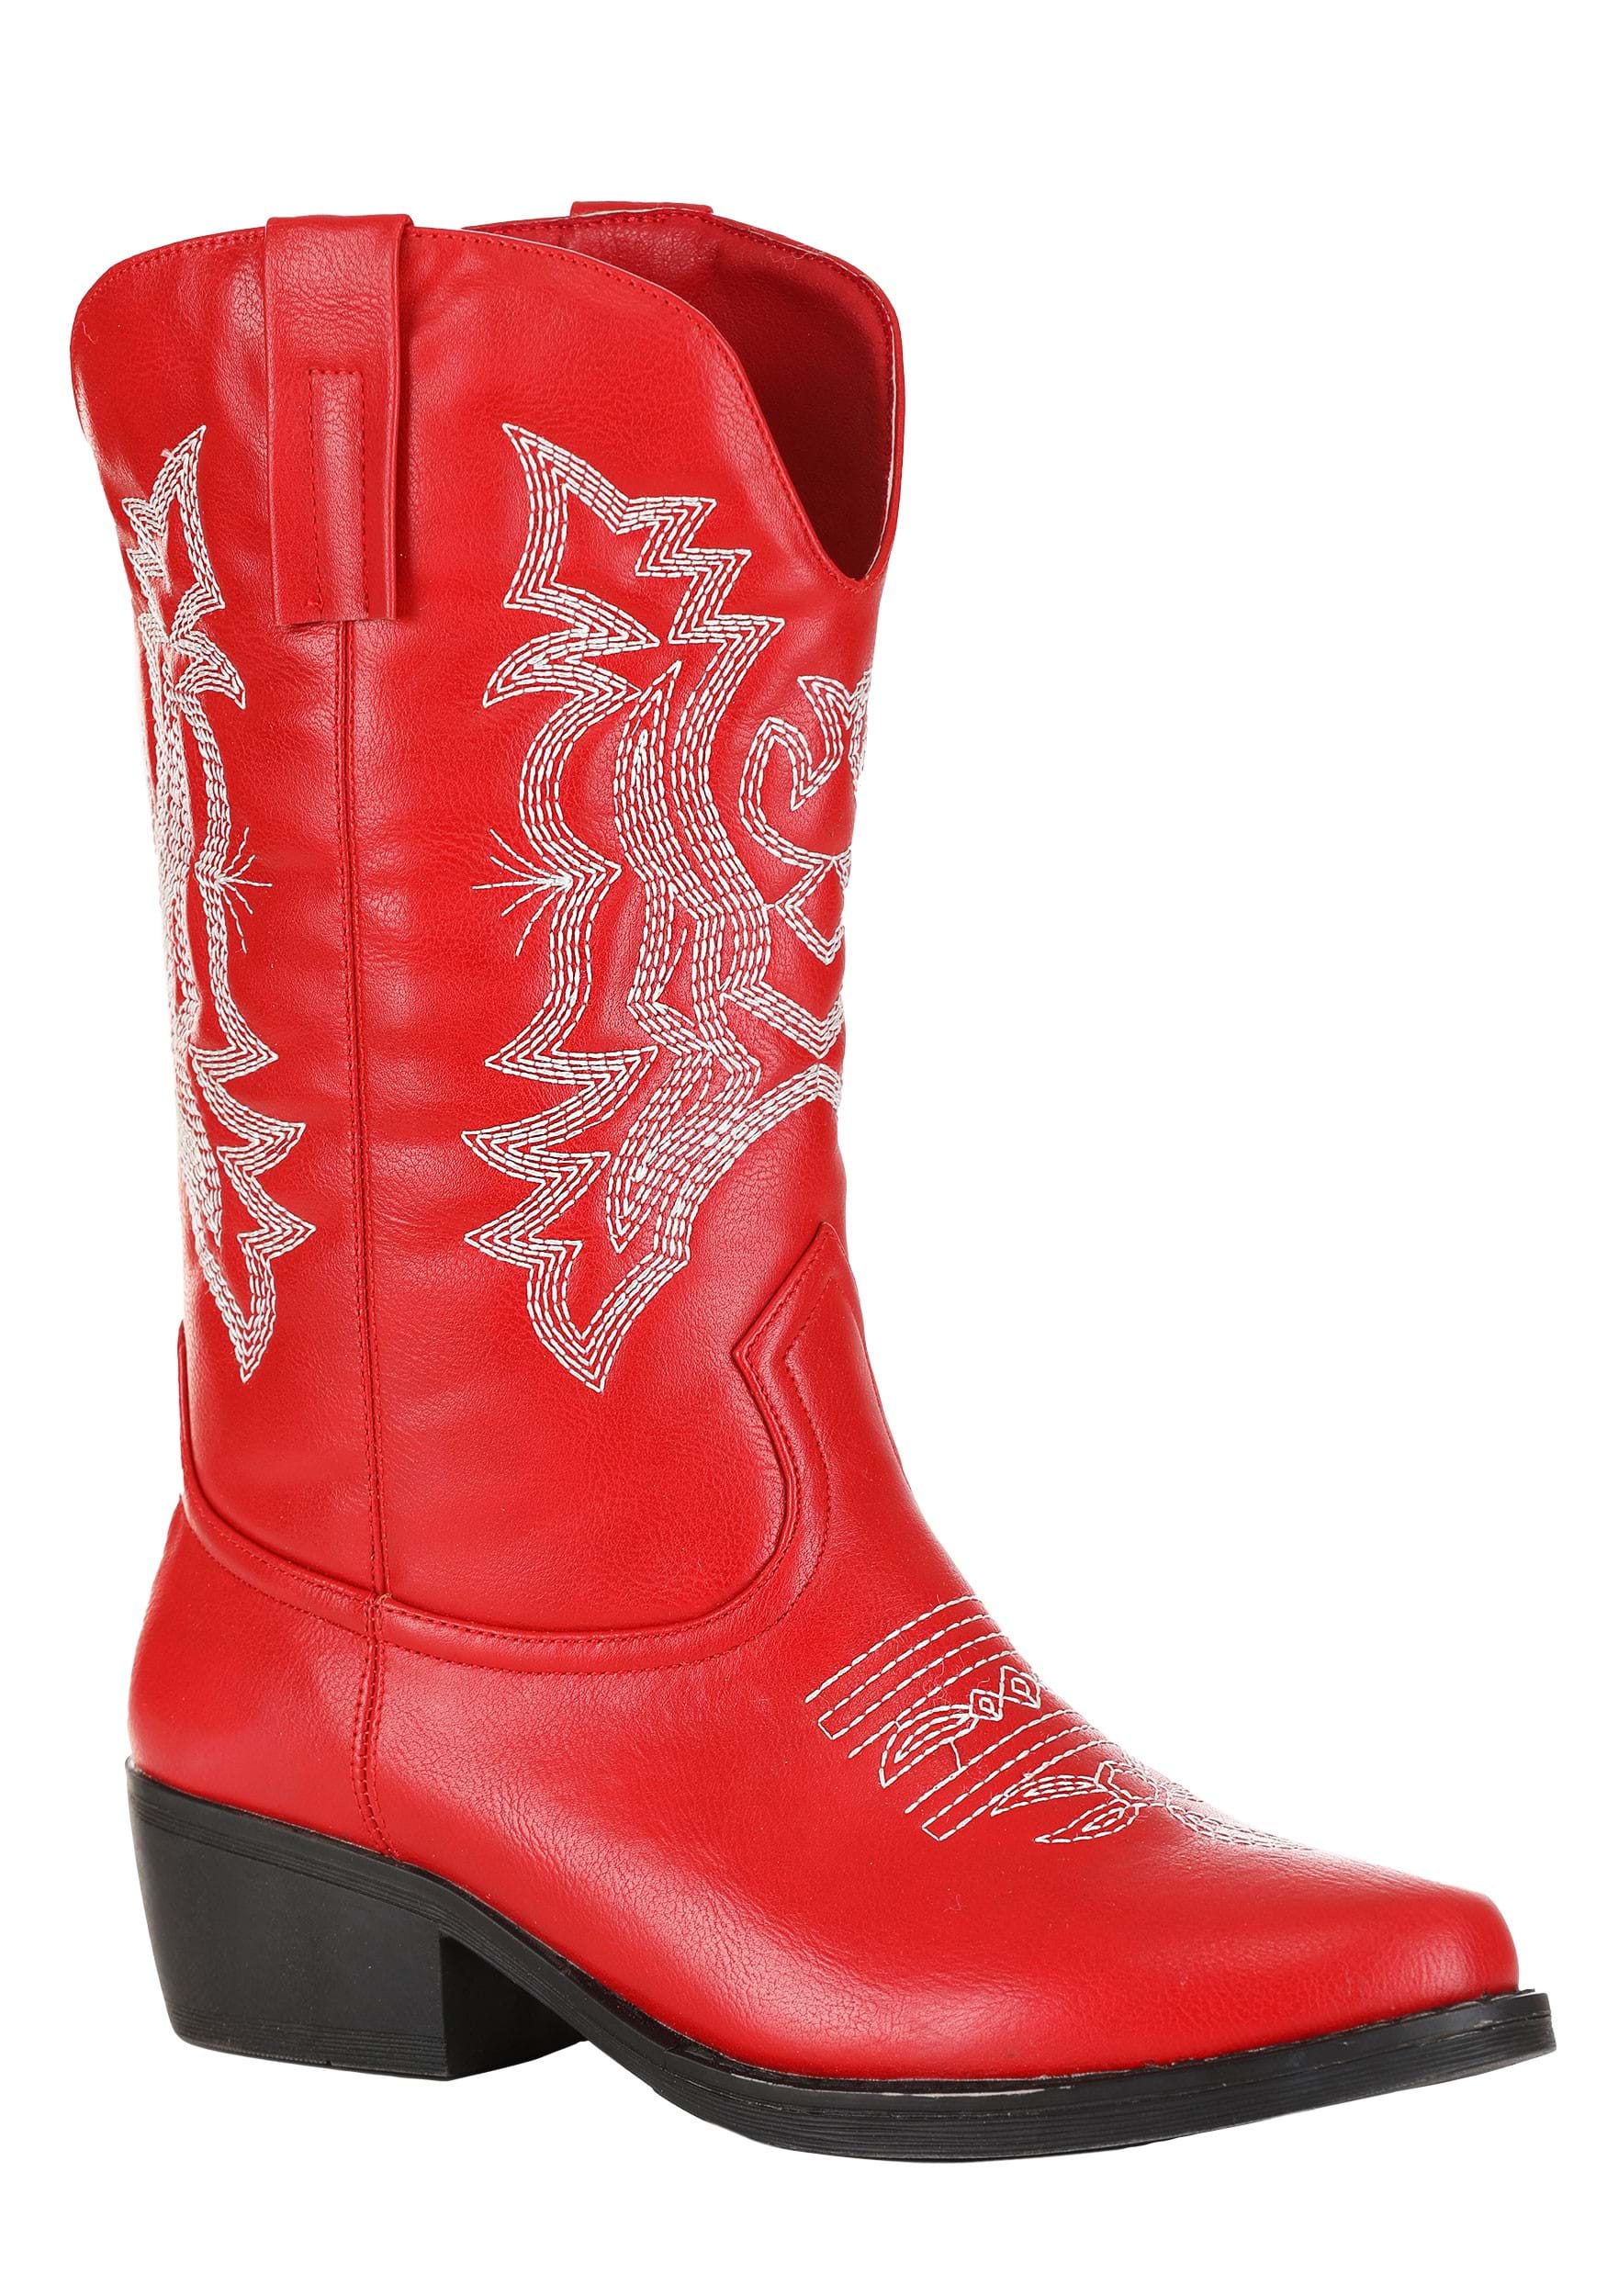 Classic Women's Red Cowgirl Boots , Costume Boots